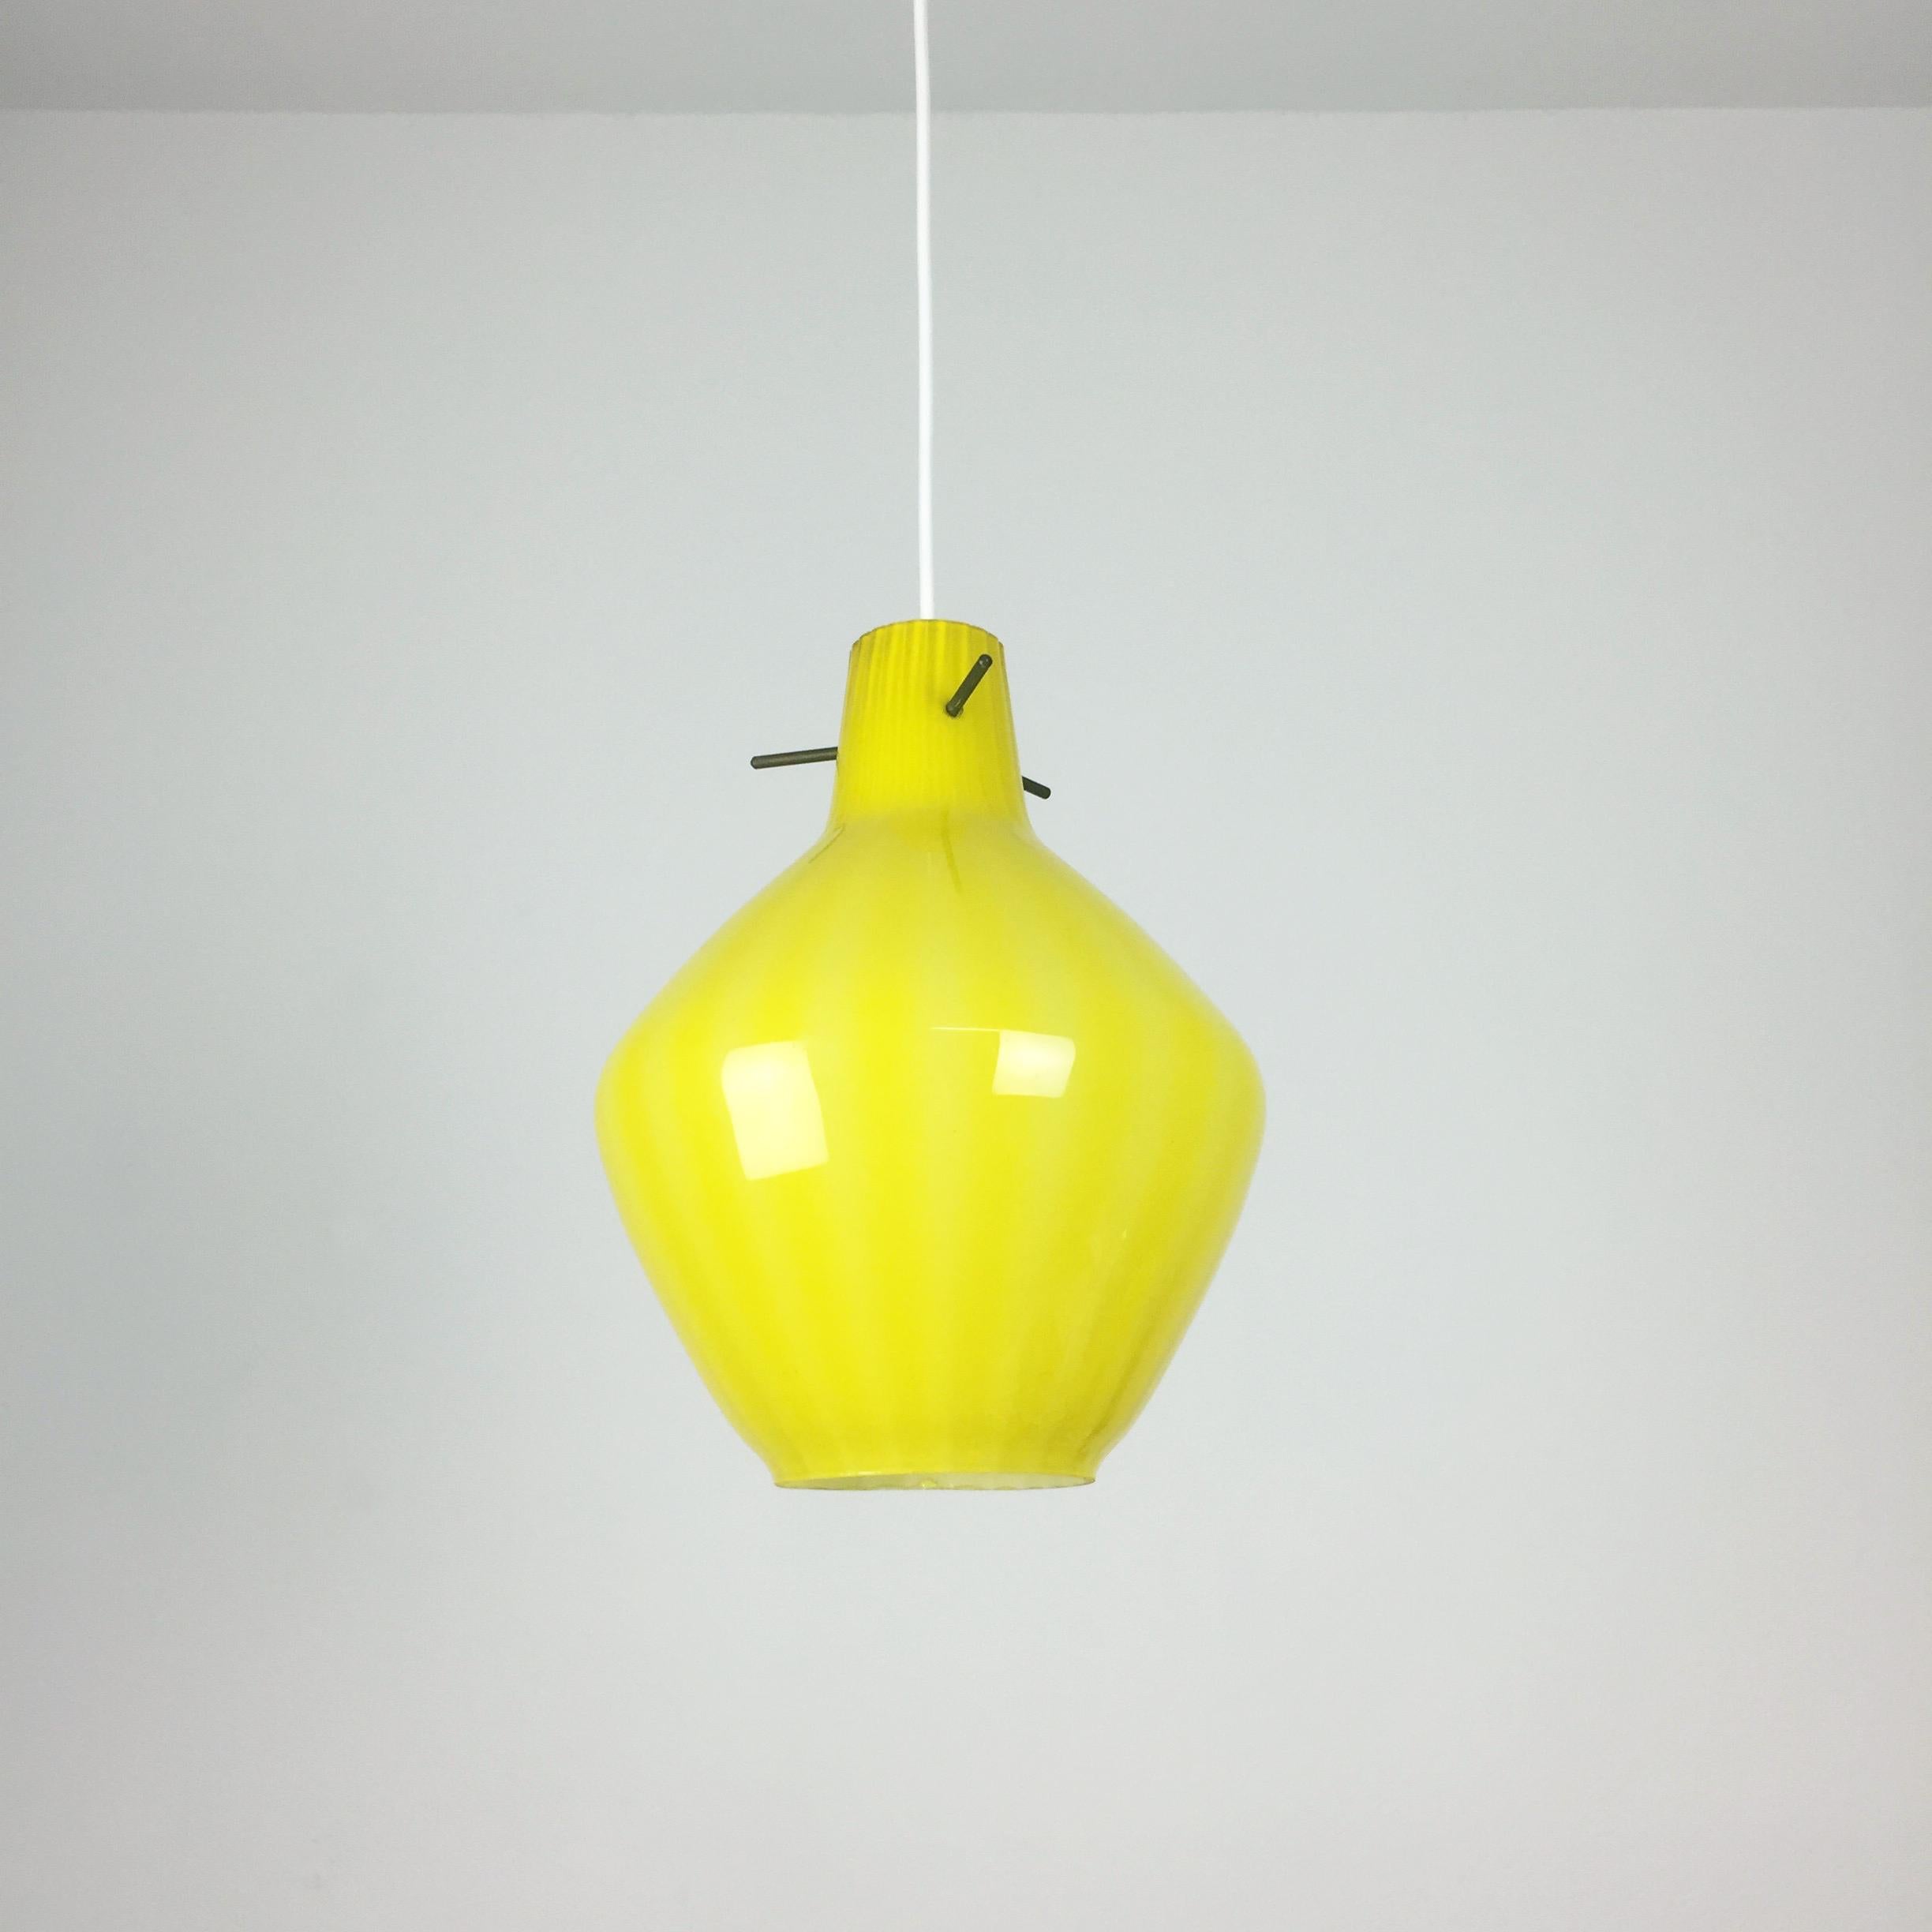 Article: Hanging light


Origin: Italy


Age: 1960s 


Description: 

This fantastic yellow drop hanging lights was designed and produced in 1960s in Italy. The shade is made of high quality italian handblown glass. Due to the shade, the light